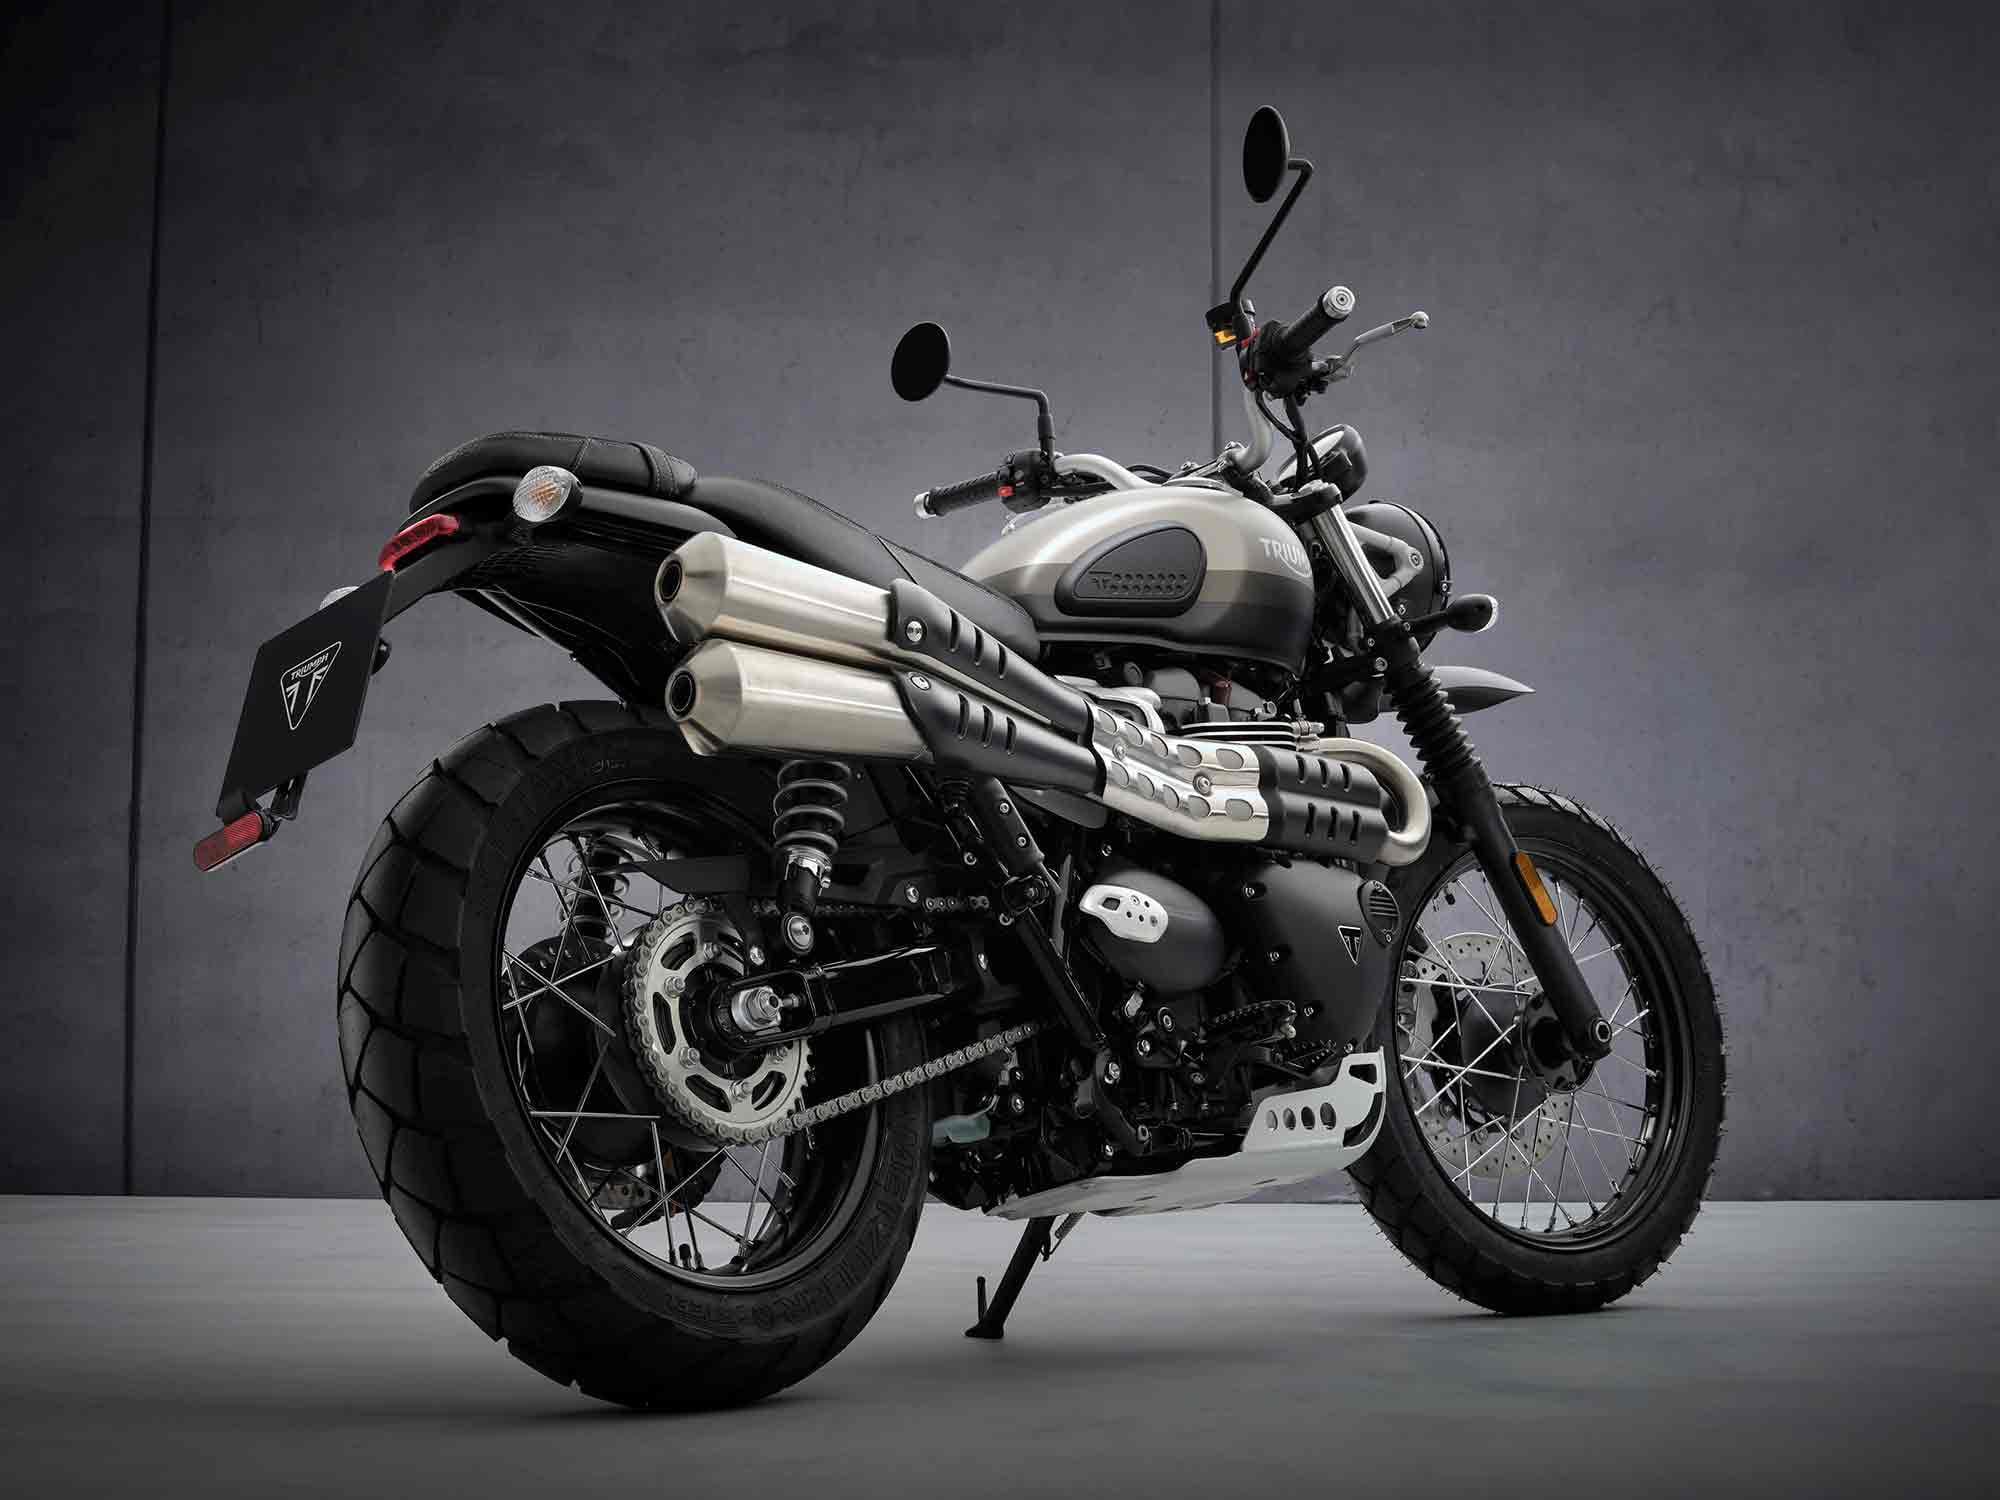 The new 2022 Street Scrambler is a limited-edition model with added premium accessories as standard. That includes the aluminum skid plate, dedicated paint scheme, a high-mount front fender, and more.